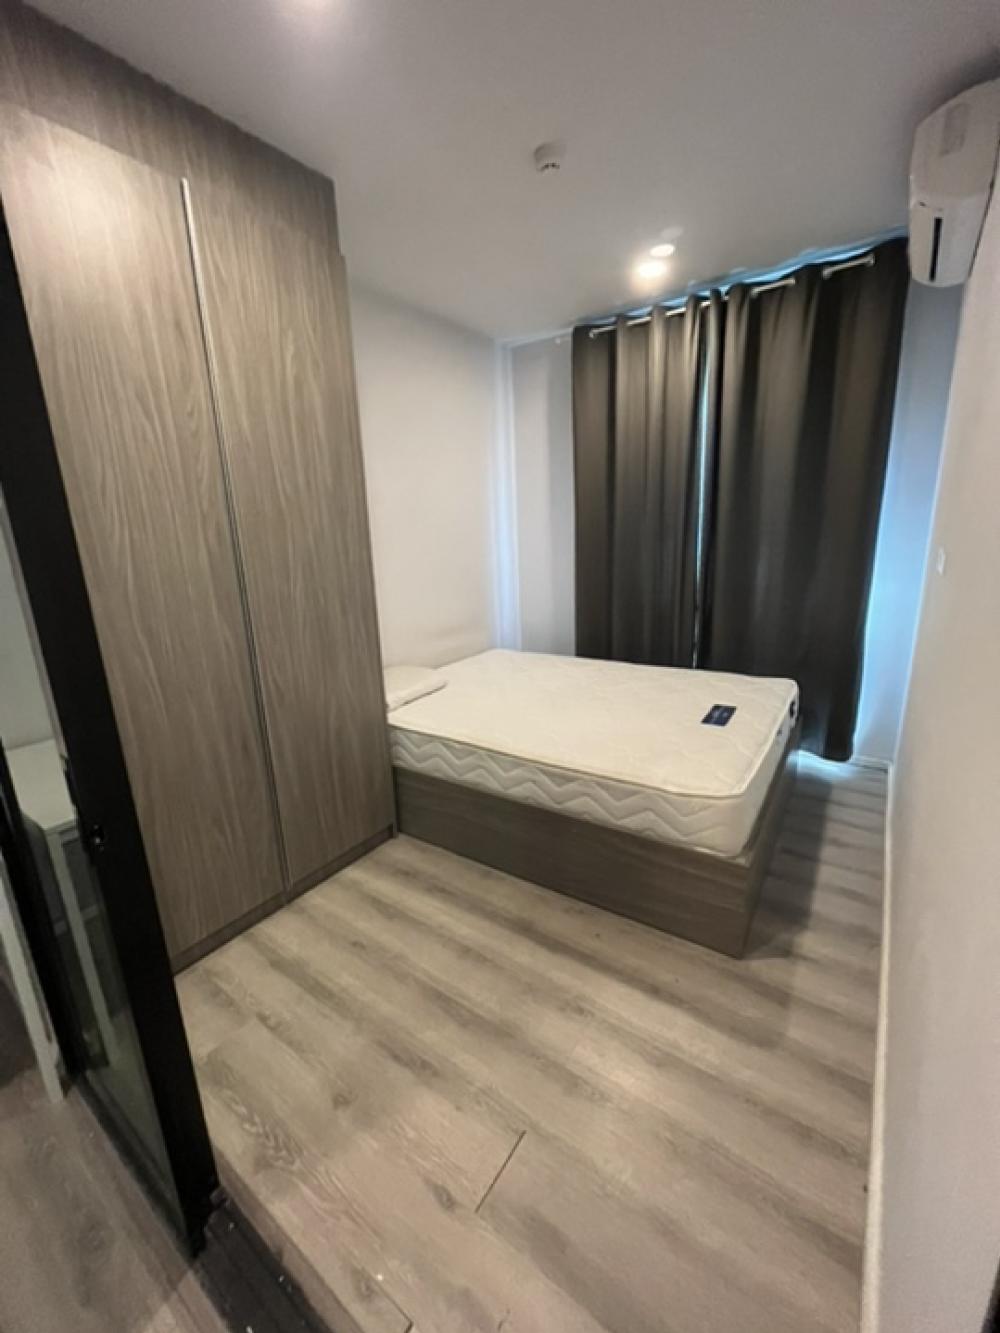 For RentCondoBangna, Bearing, Lasalle : Notting Hill Condo, Sukhumvit 105, beautiful room, livable, fully furnished Near BTS Bearing, only 400 meters, Condo for rent Notting Hill Sukhumvit 105